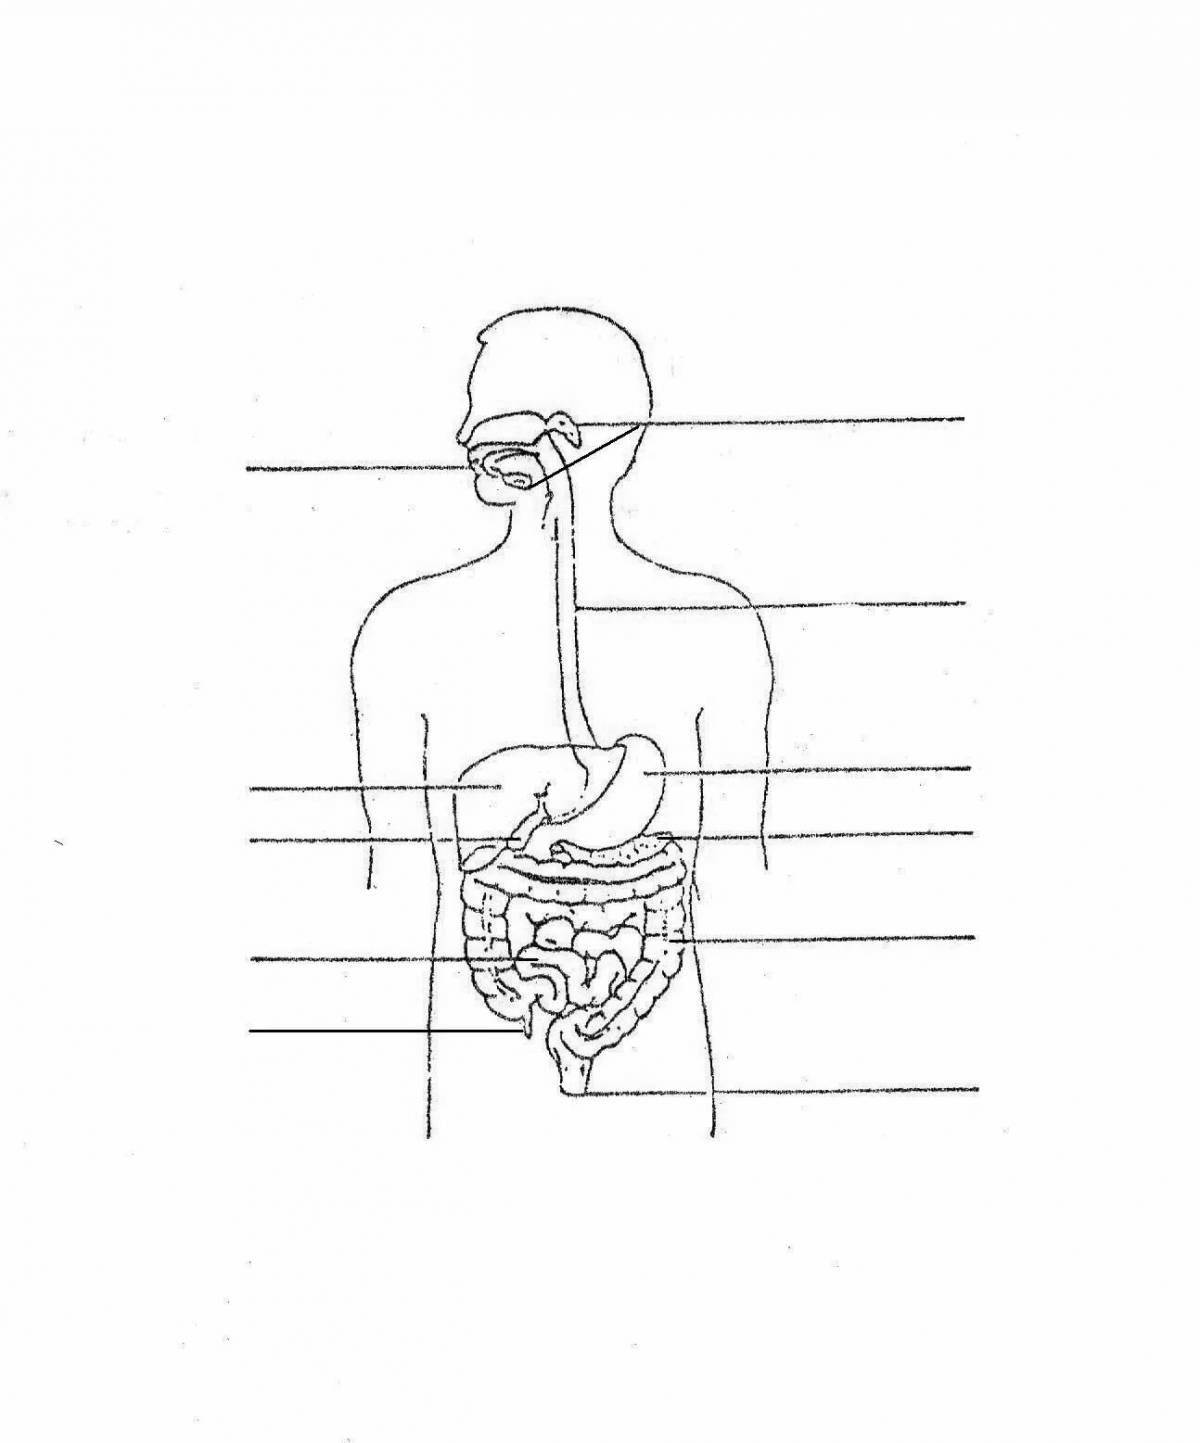 Gourmet digestive system coloring book